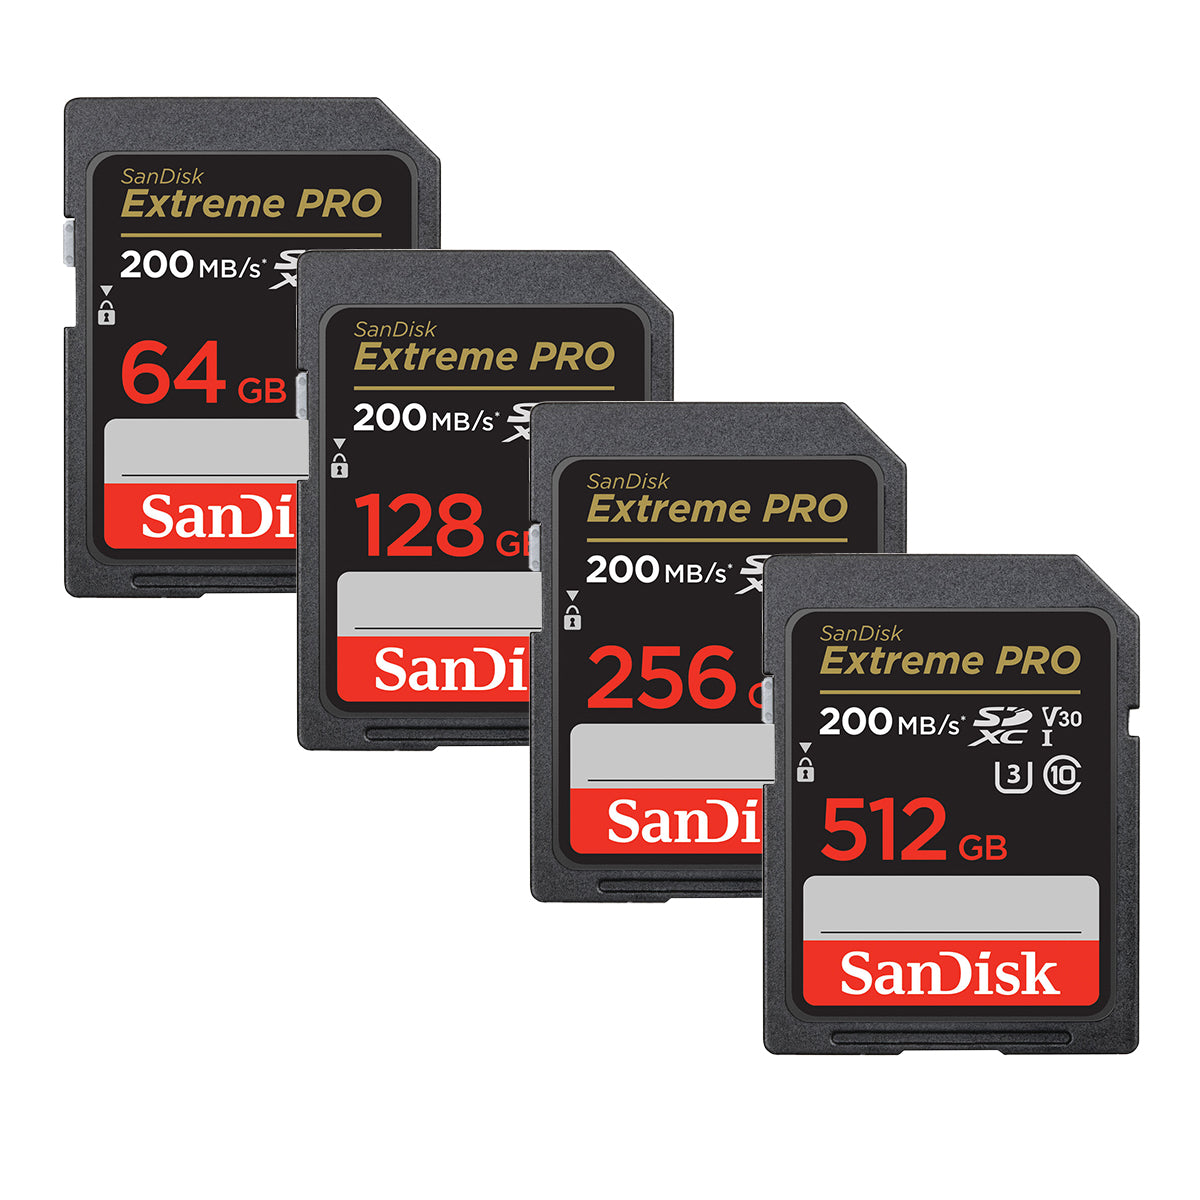 Sandisk Extreme Pro SD Card 64GB UHS II SDXC Class 10, 300MB/s and 260 – JG  Superstore